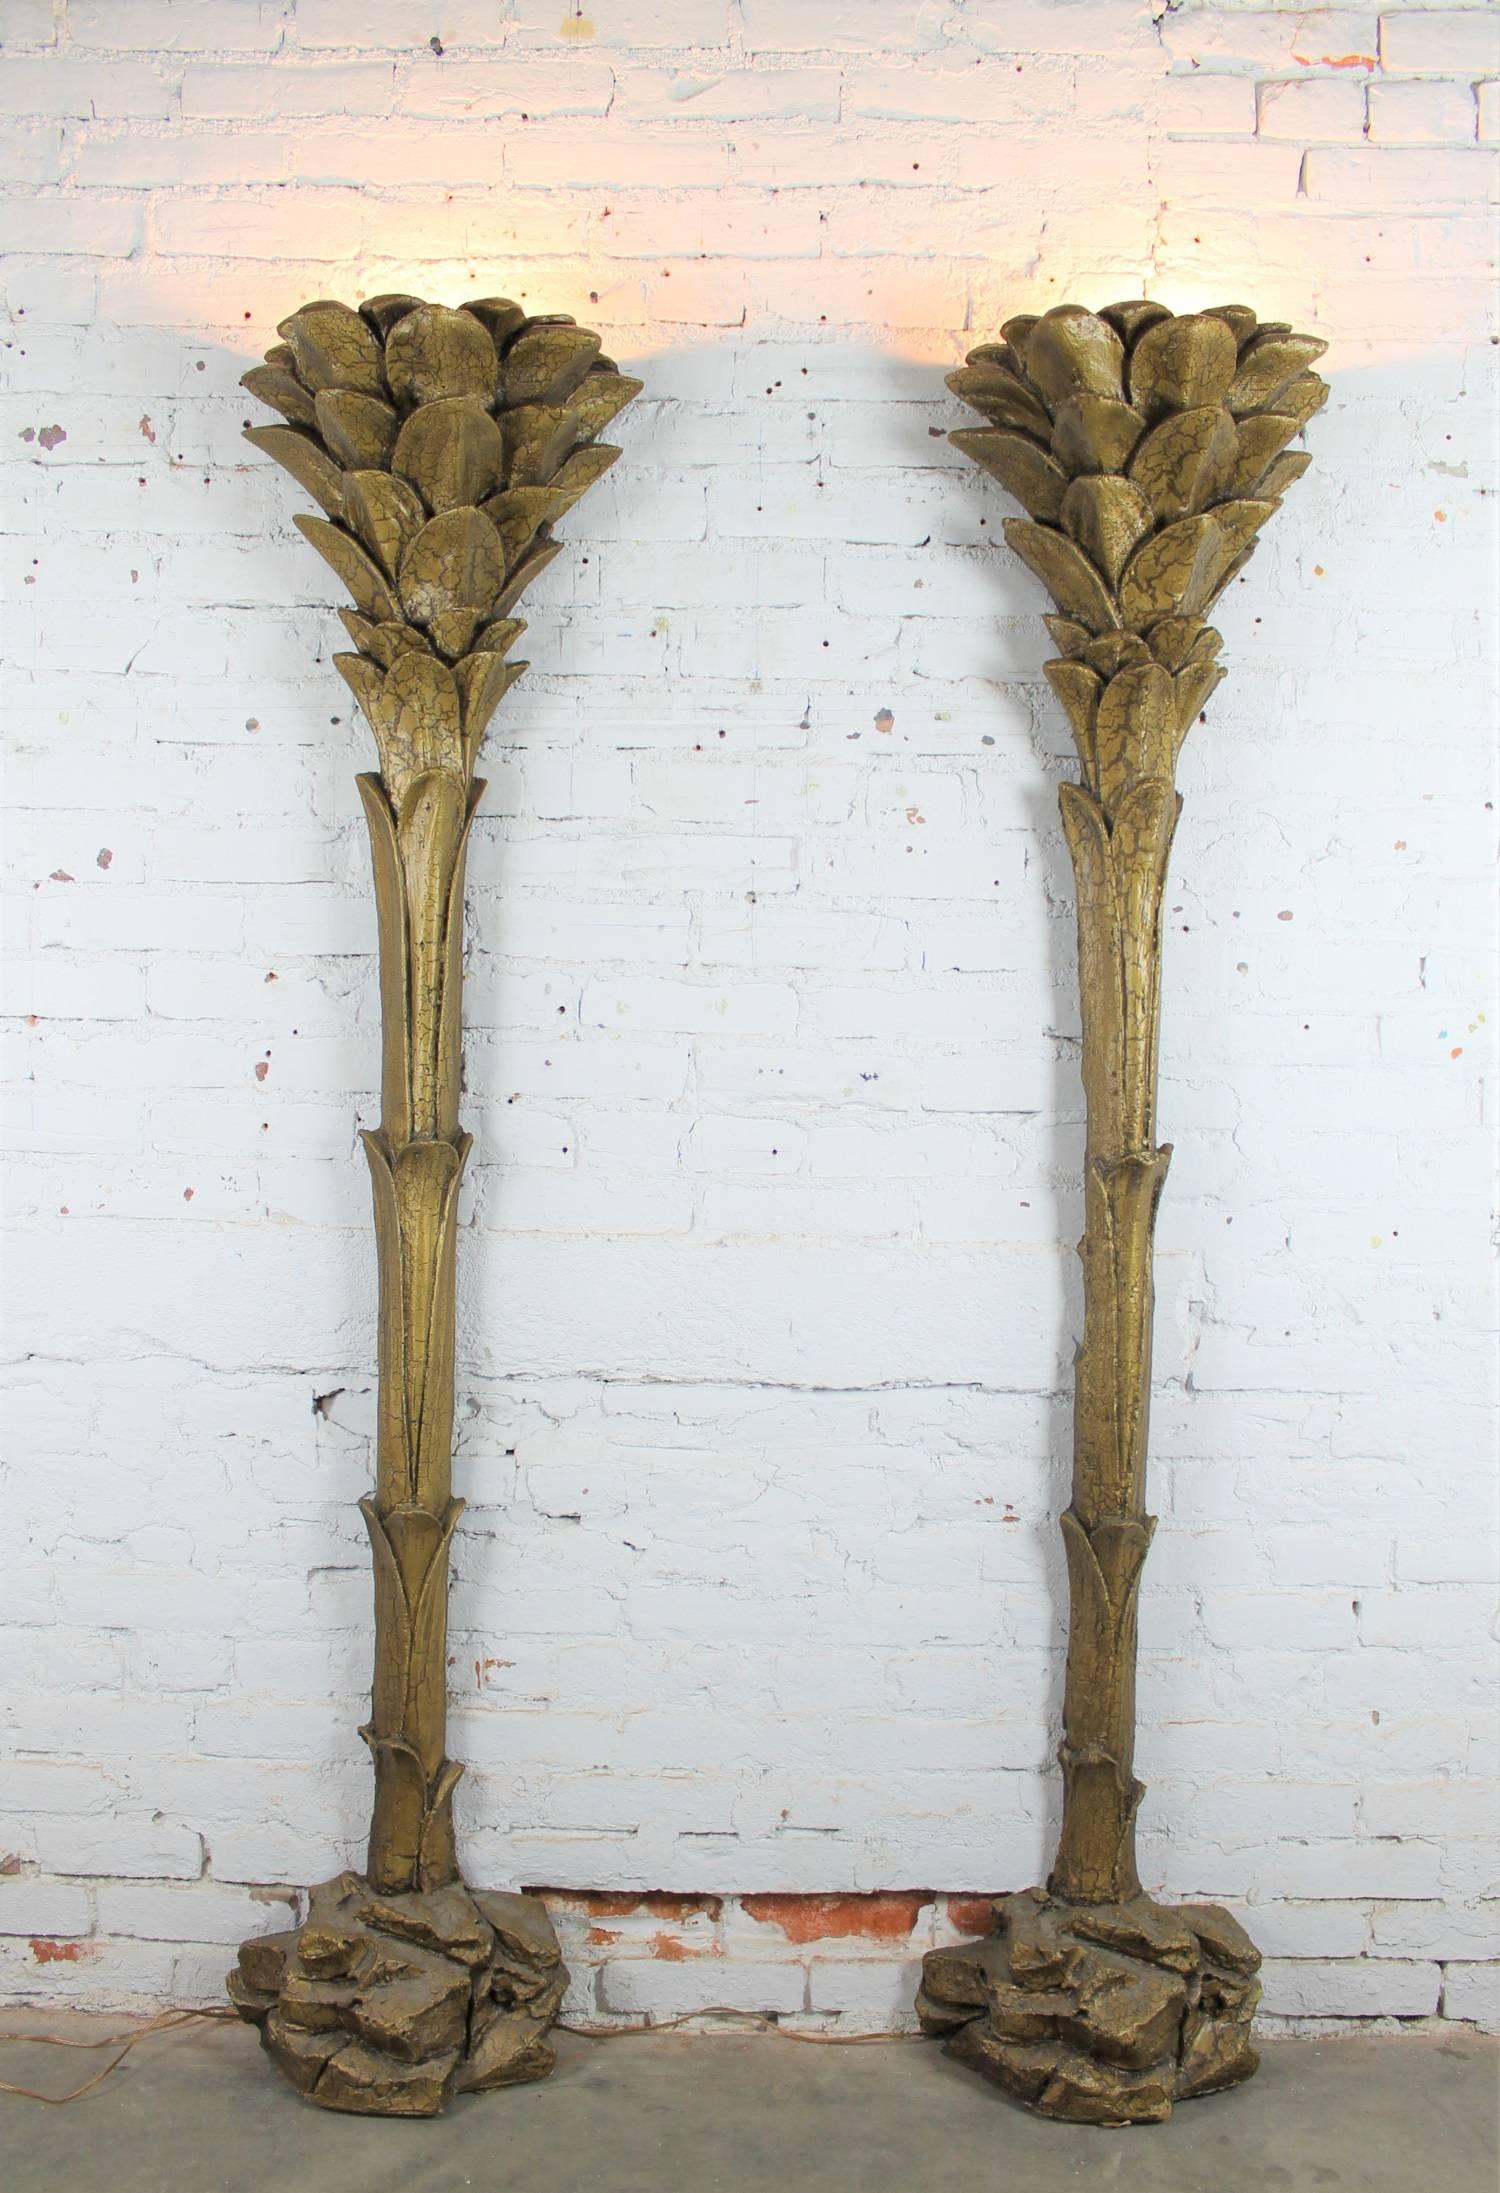 Outstanding gilded polystyrene foam palm tree floor torchiere style wall sconce lamps in the style of Serge Roche. The pair are in wonderful vintage condition, circa 1970.

Fabulous and over-the-top! I’m not sure what style to call this pair of